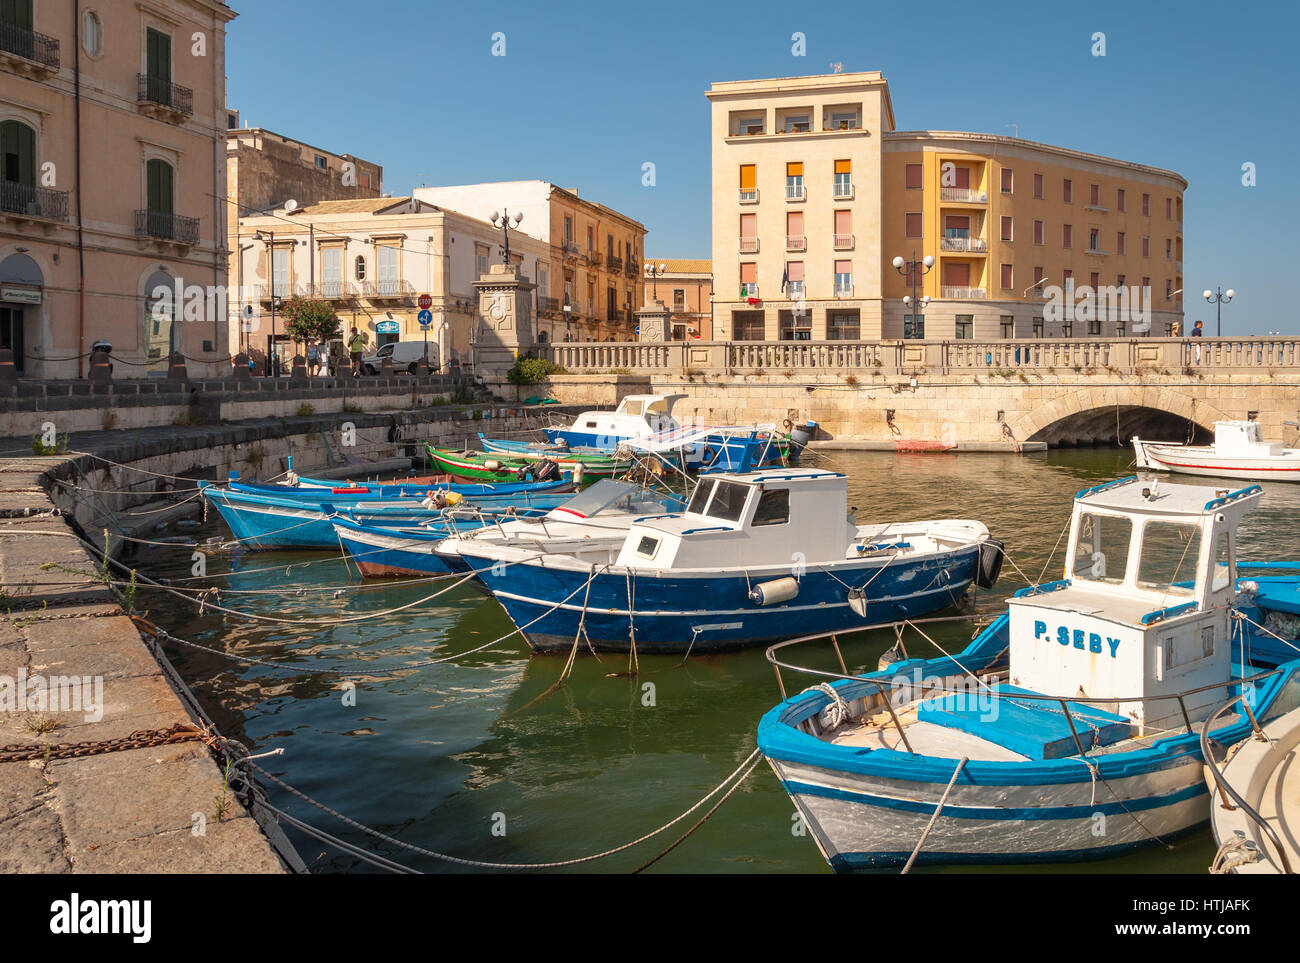 SYRACUSE, ITALY - SEPTEMBER 14, 2015: Fishing boats in the city of Siracuse, Sicily Stock Photo